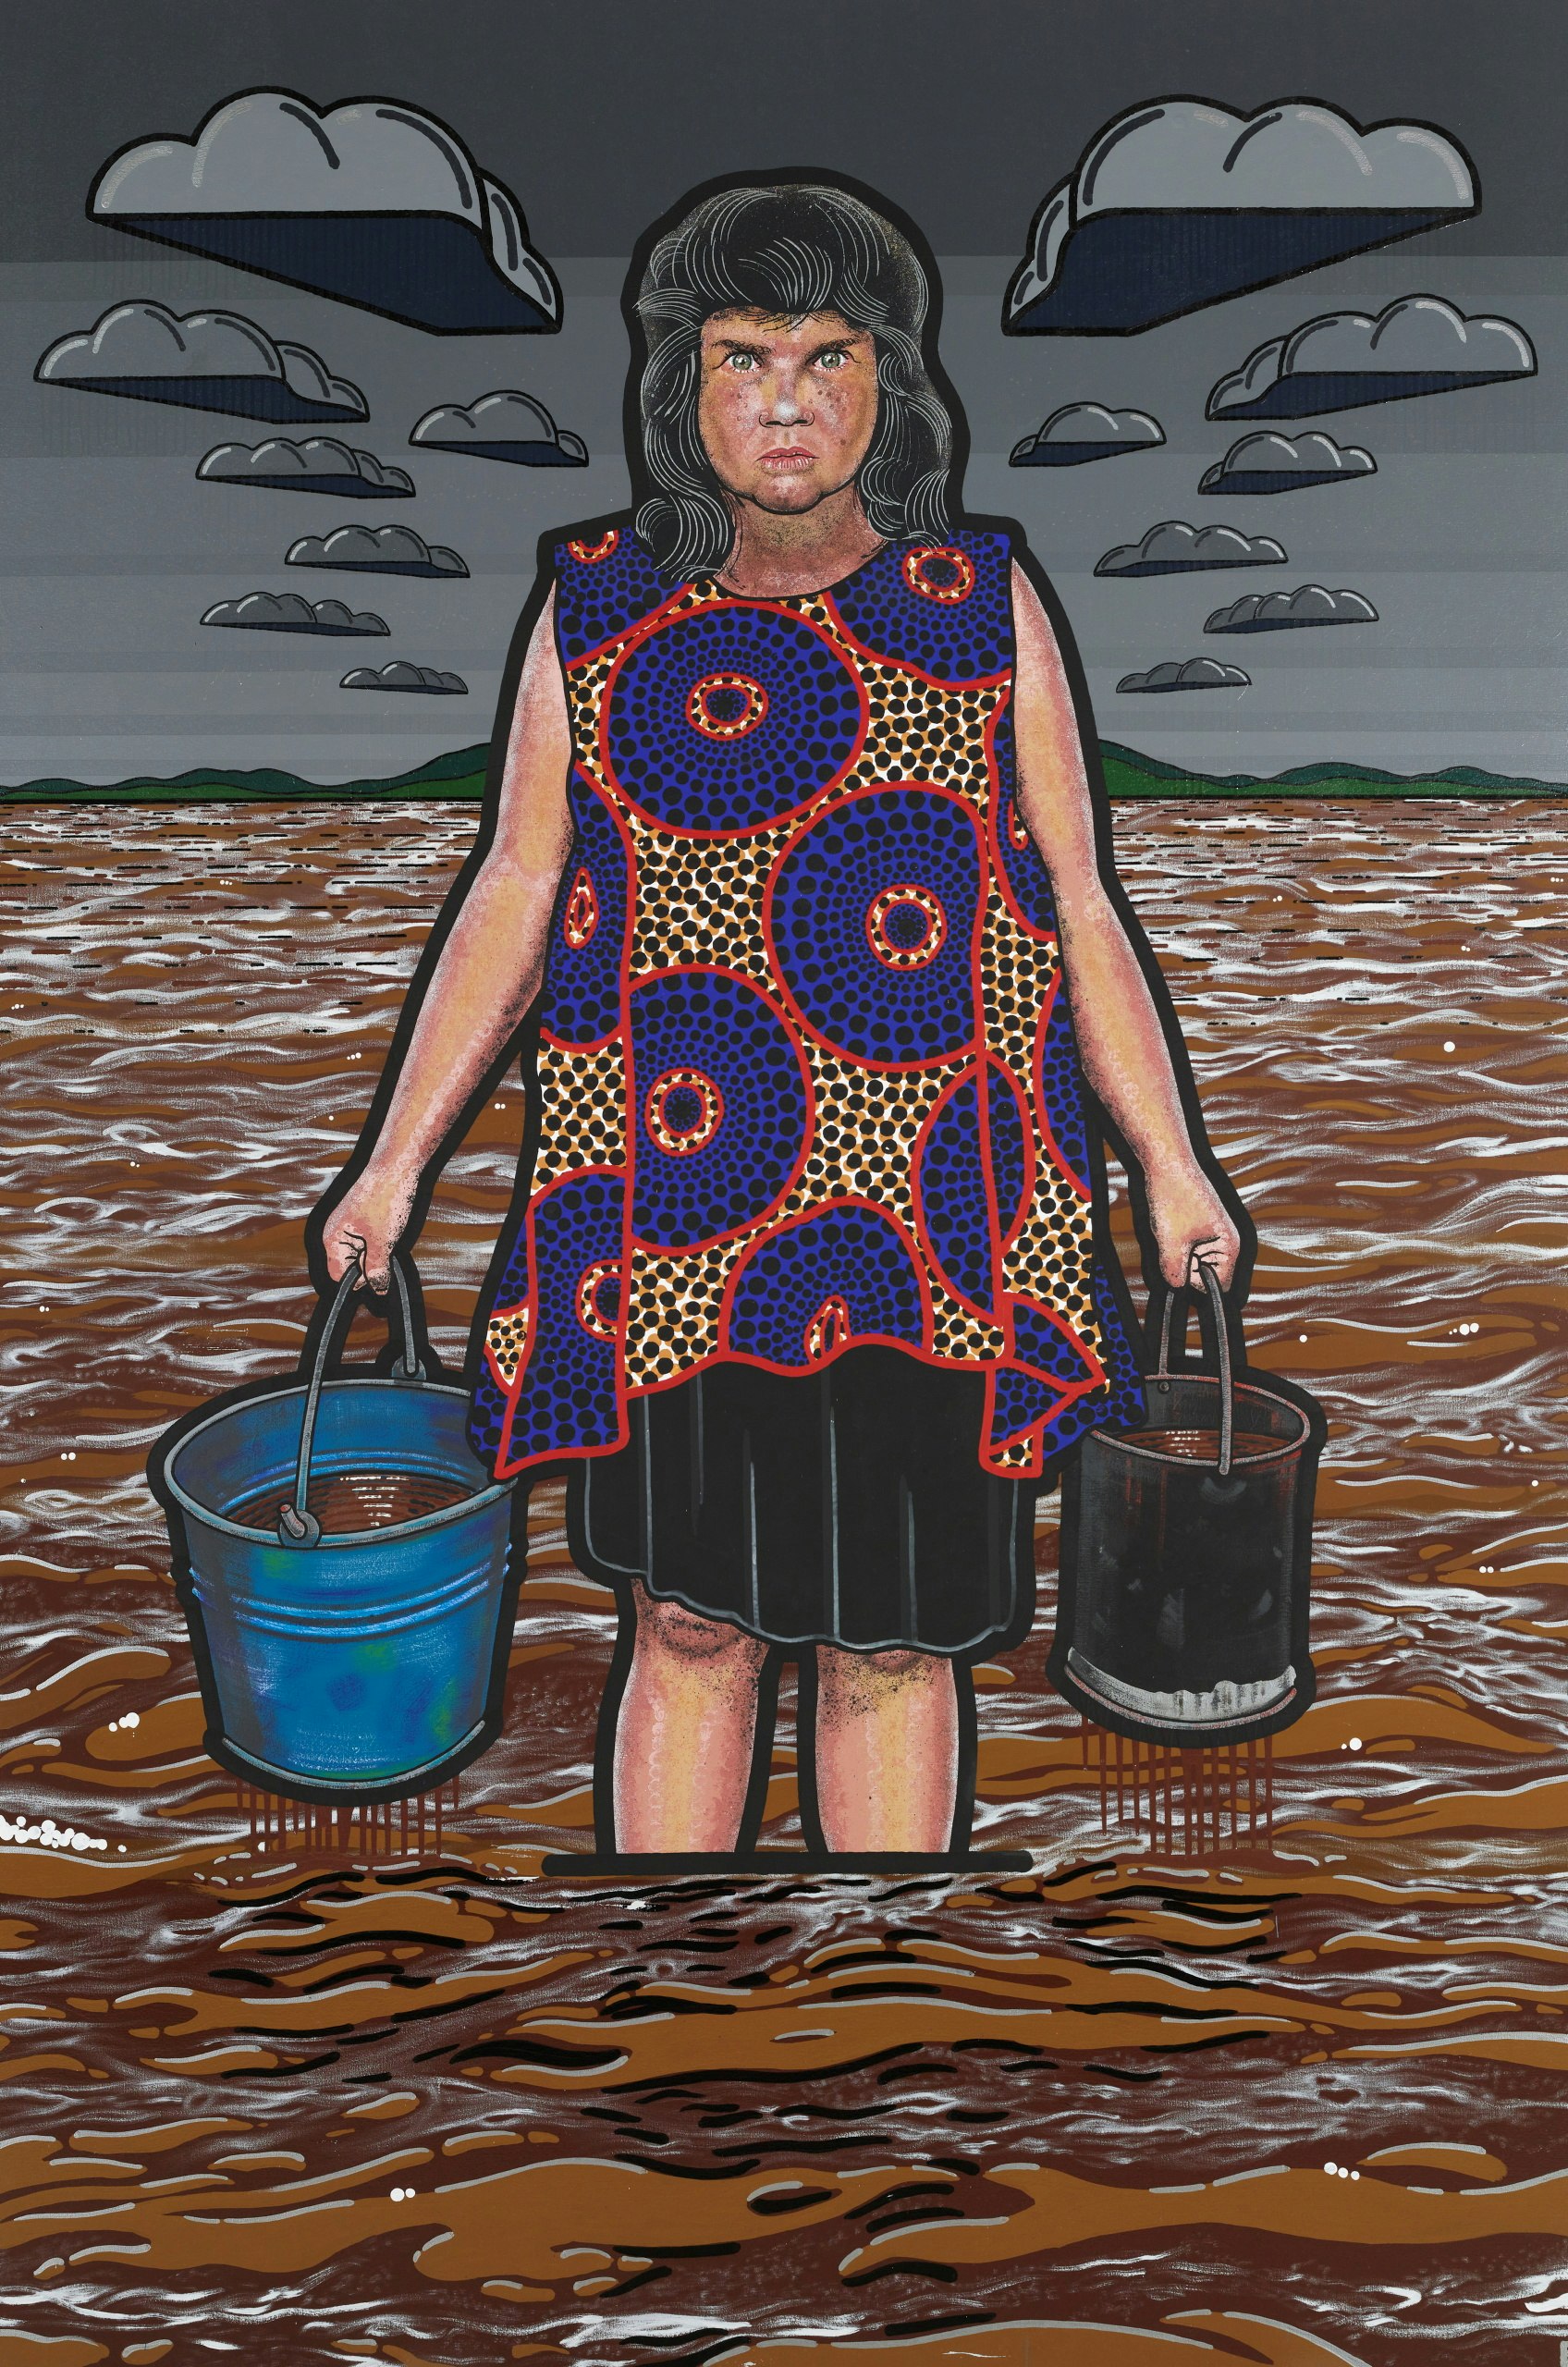 A person stands calf-deep in water holding a bucket in each hand.